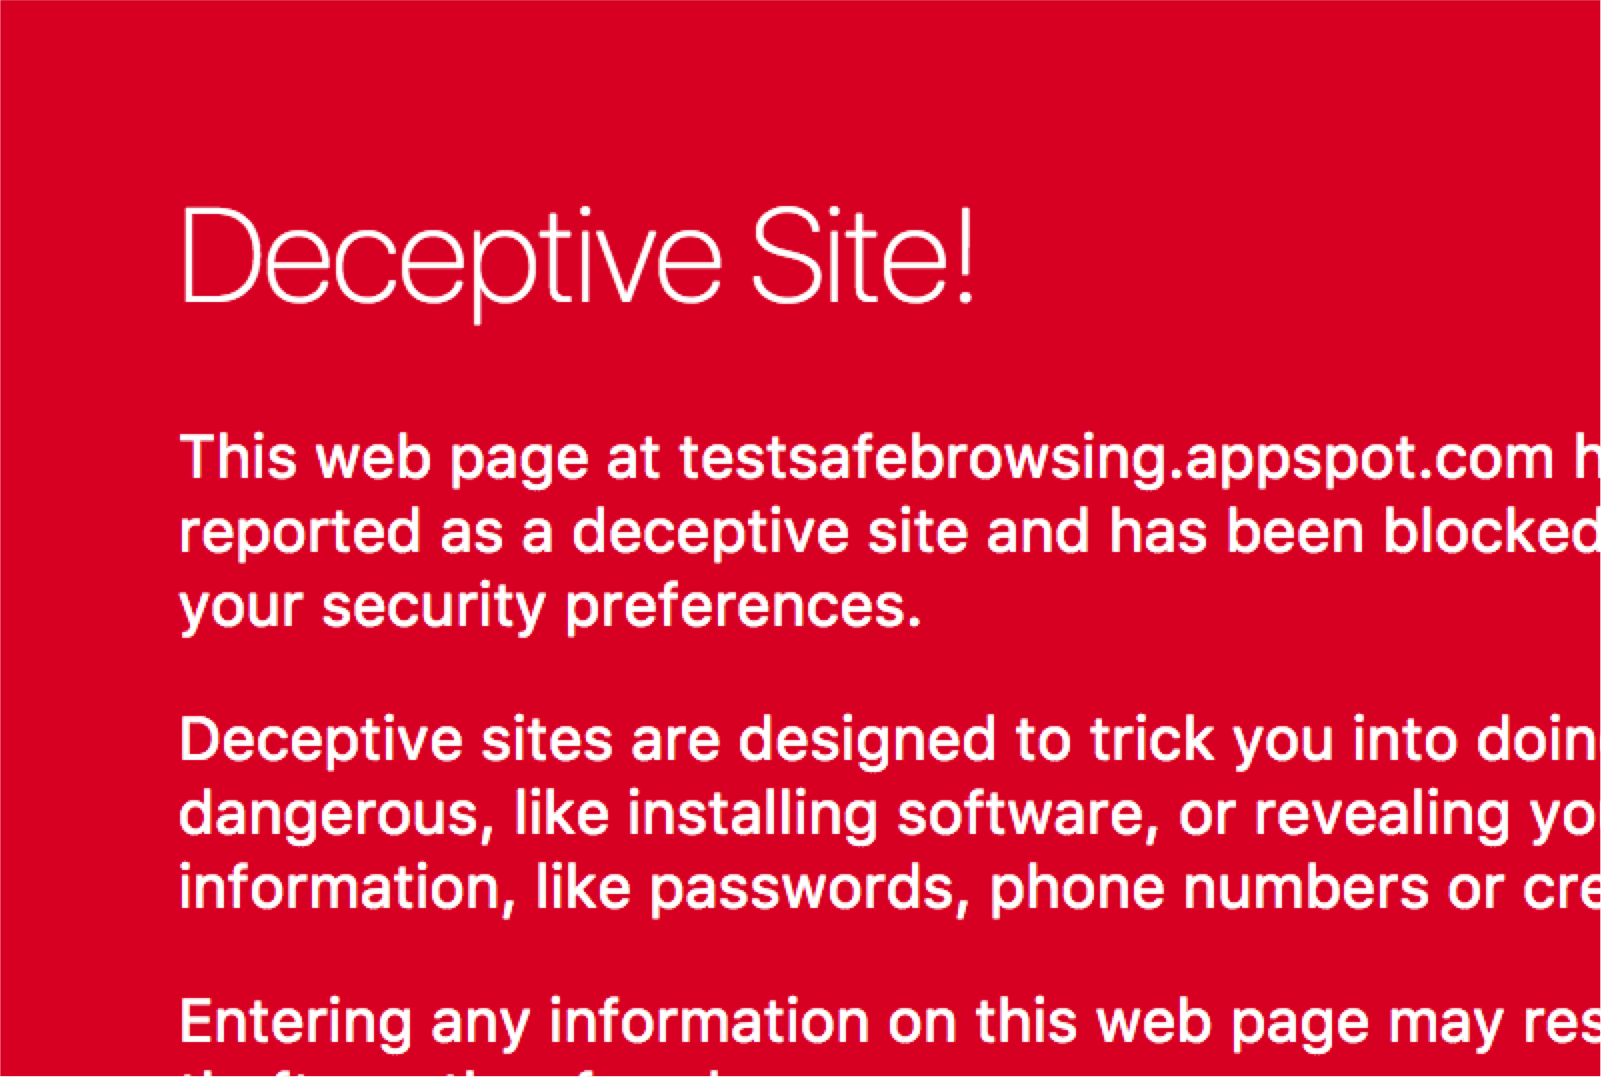 An indication of a deceptive website